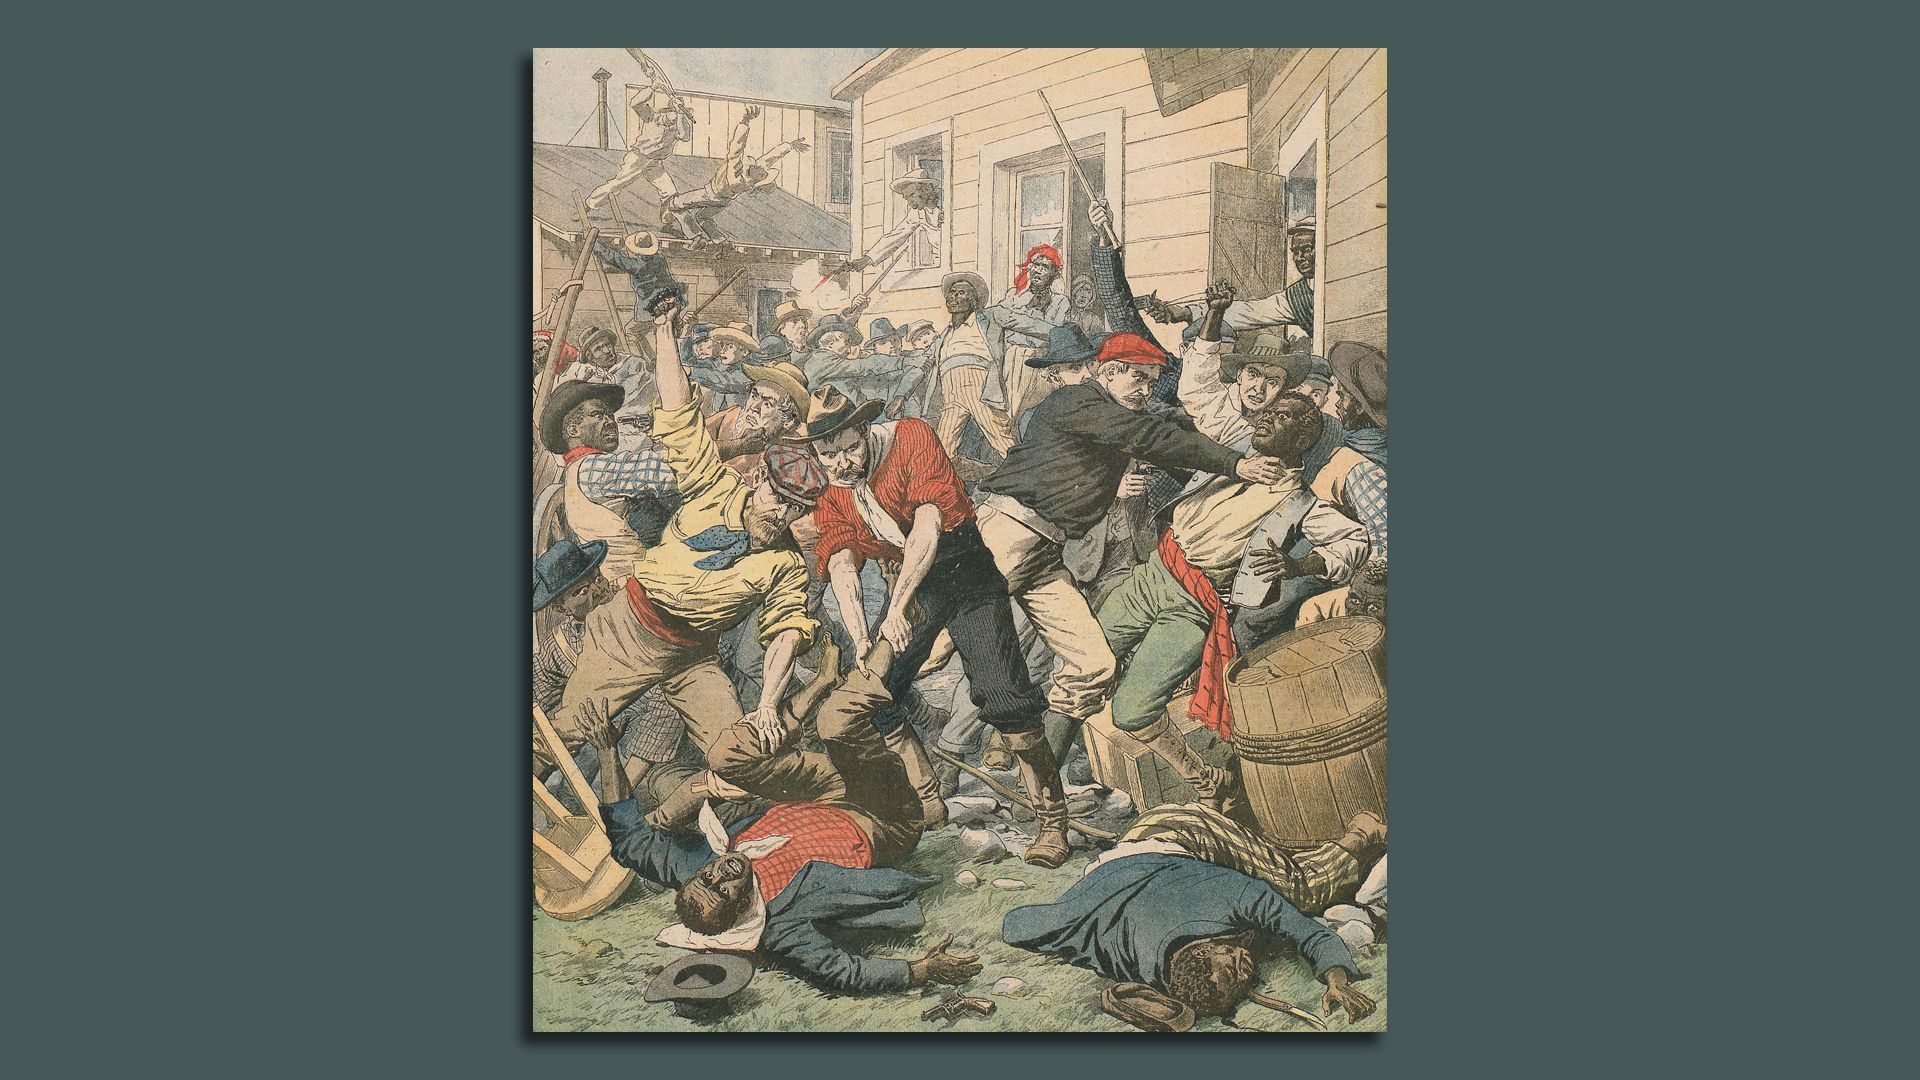 A zoomed-in look at an October 1906 French newspaper with a cover depicting the Atlanta Race Massacre